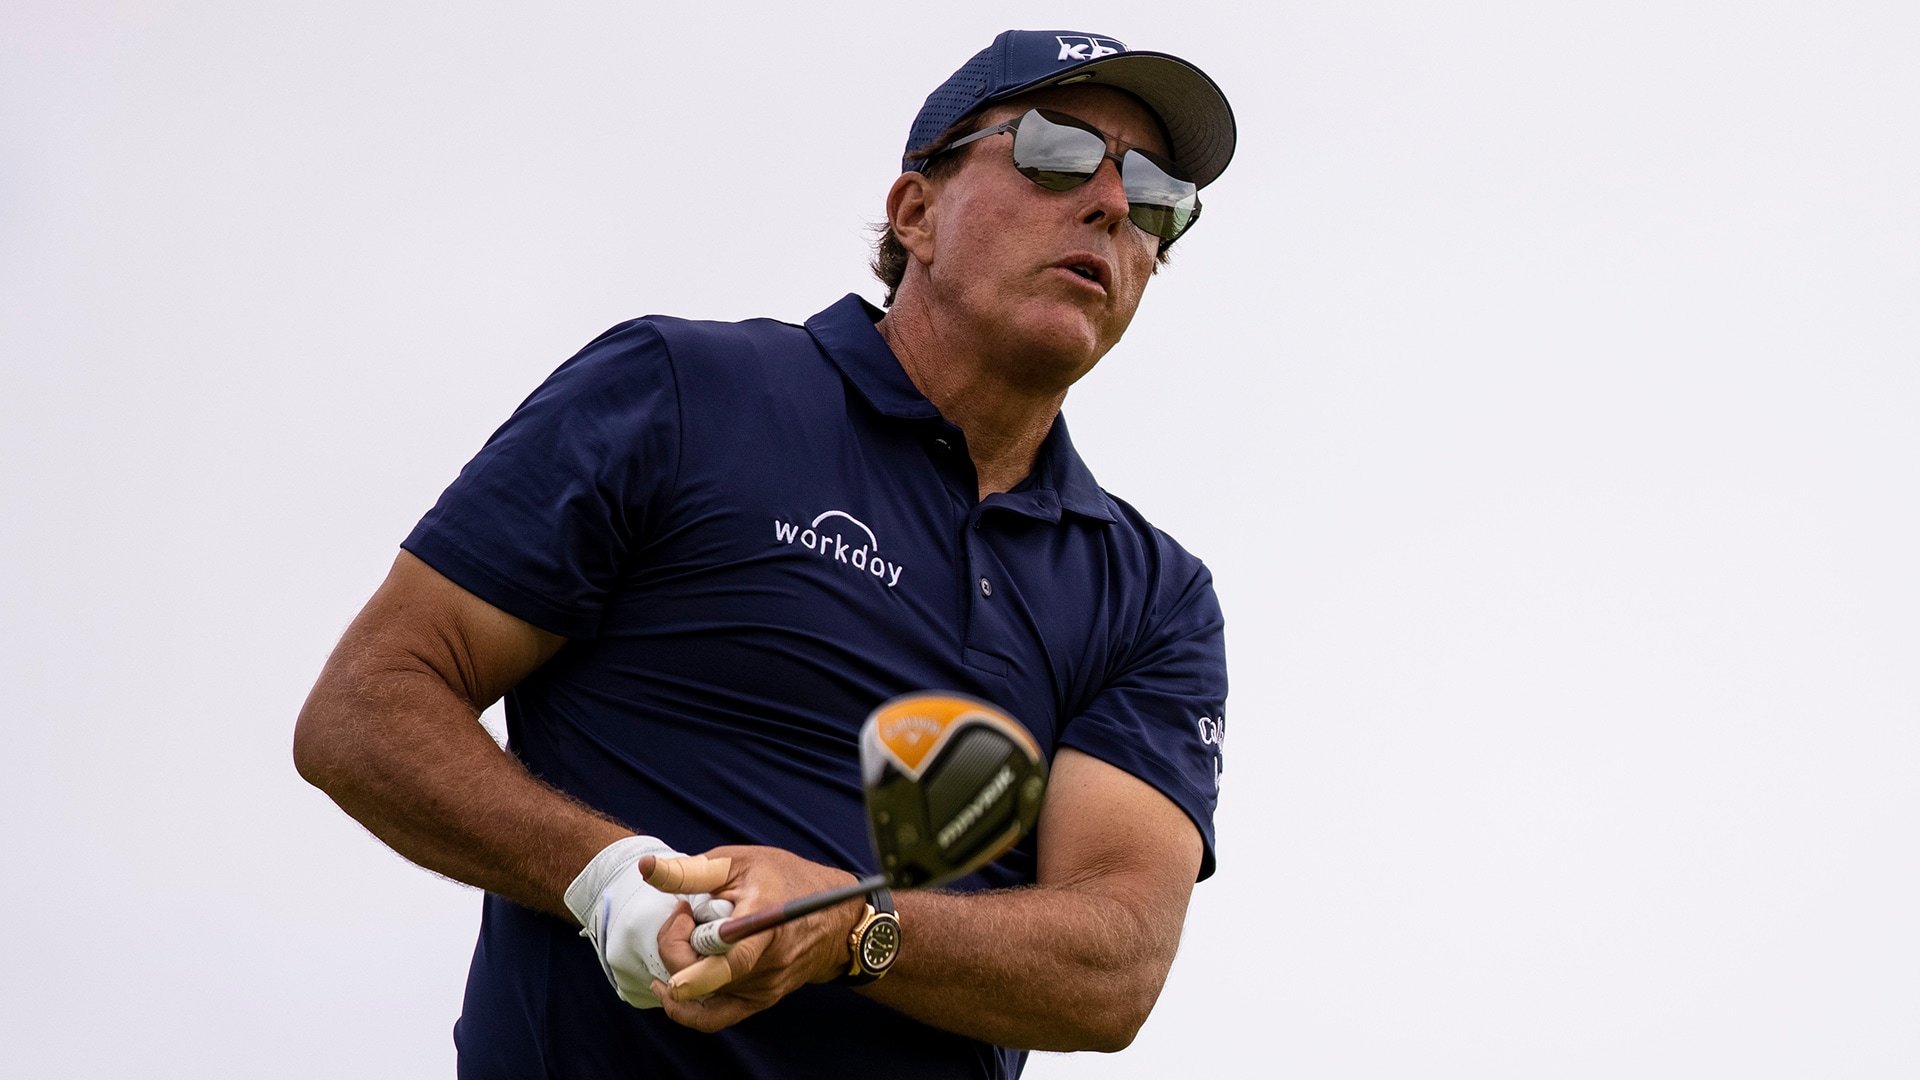 Phil Mickelson ties PGA Tour Champions scoring record in debut win